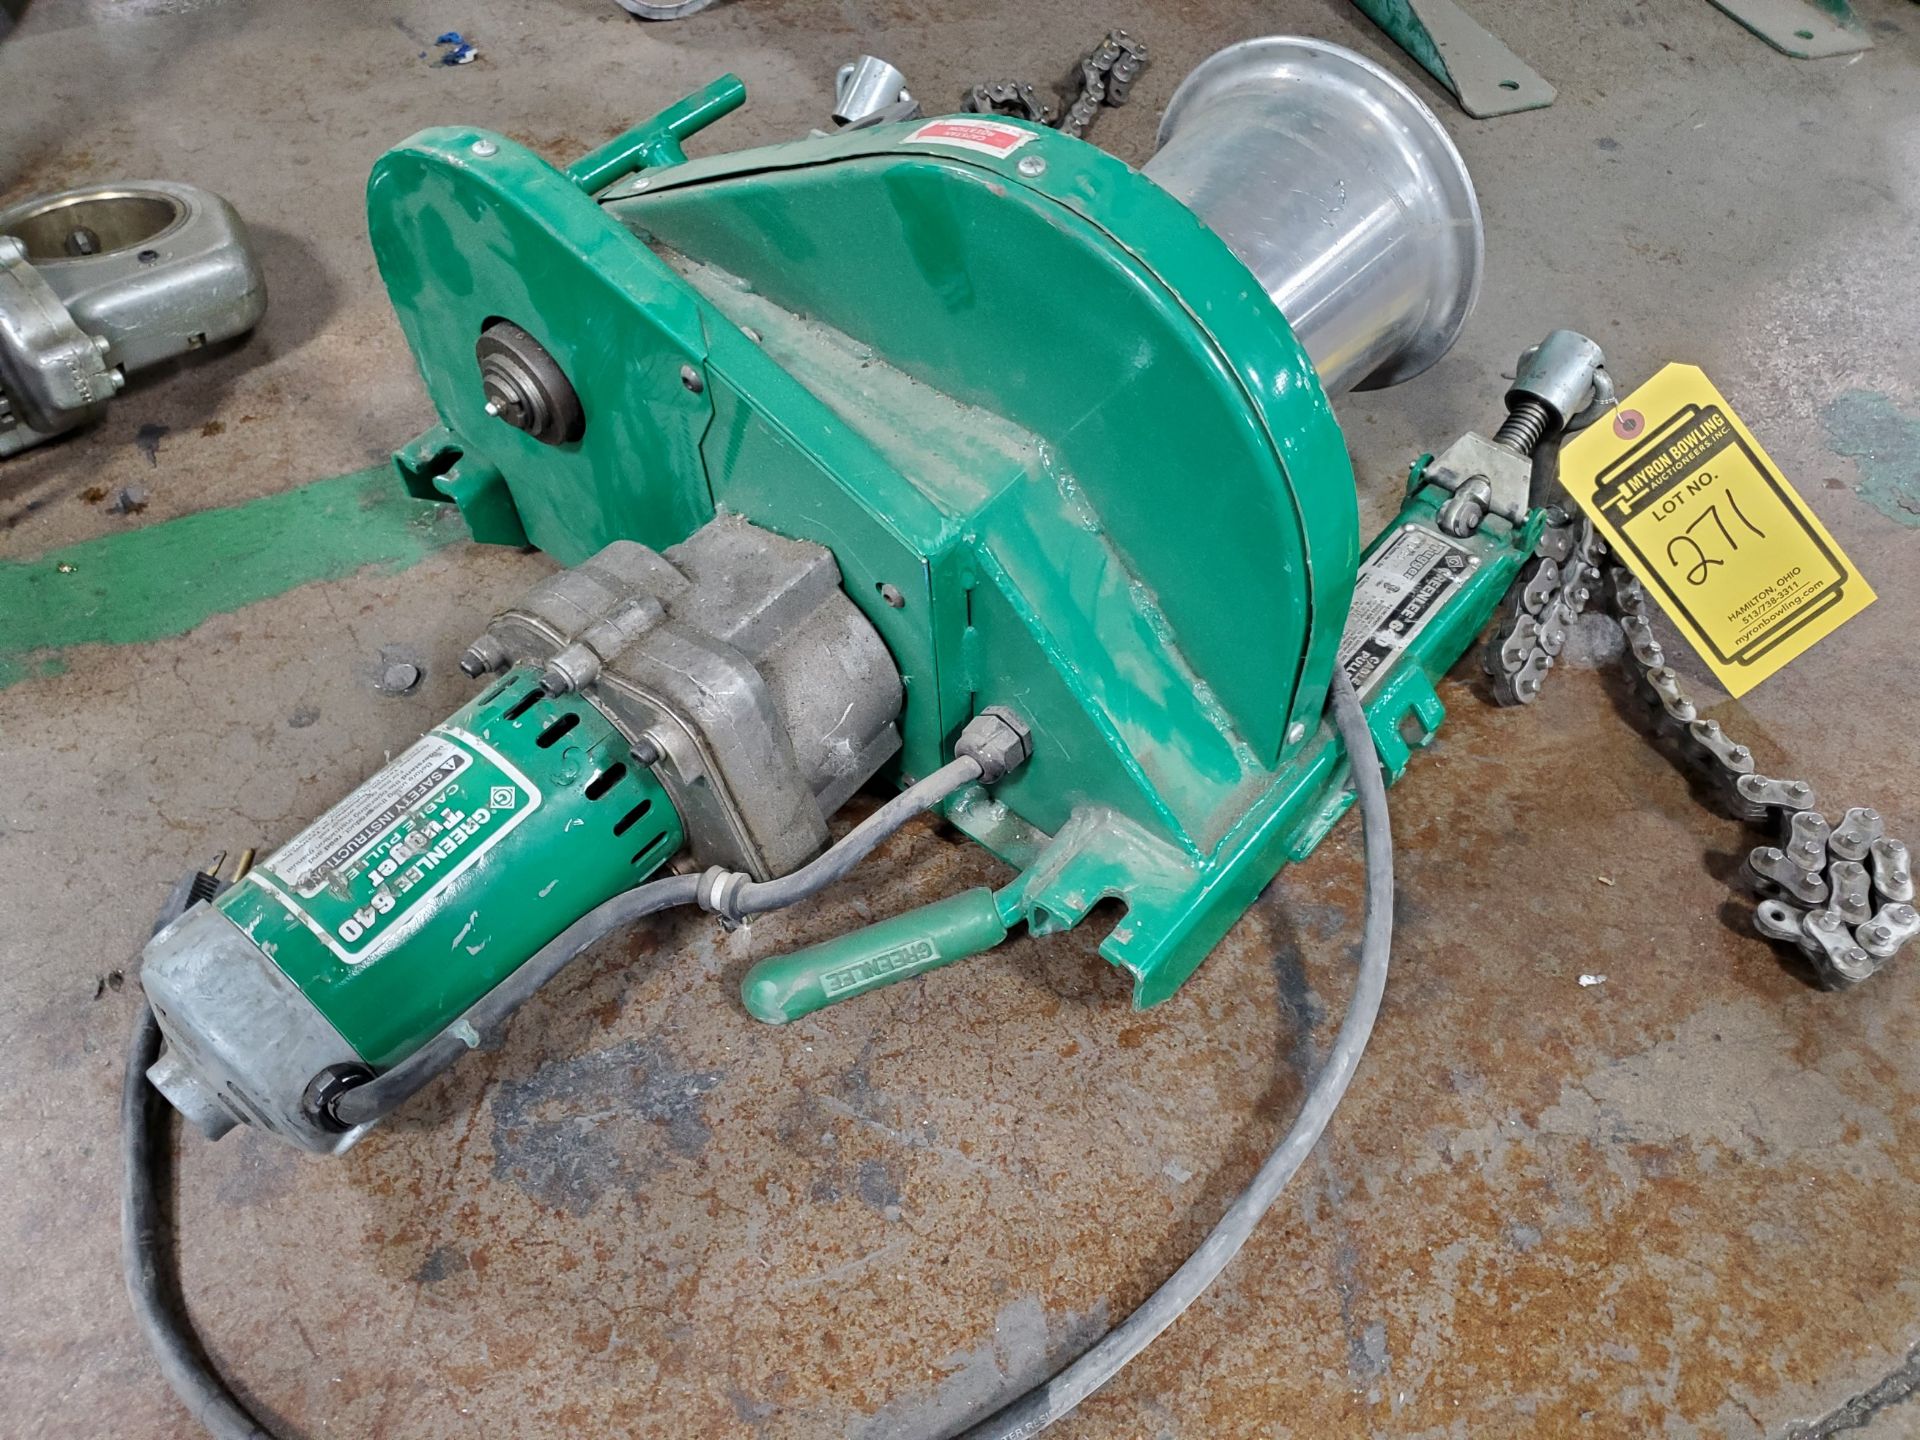 GREENLEE TUGGER CABLE PULLER, MODEL 640 WITH GREENLEE 446 CABLE PULLER BOX WITH 442 PORTA-PULLER - Image 2 of 6